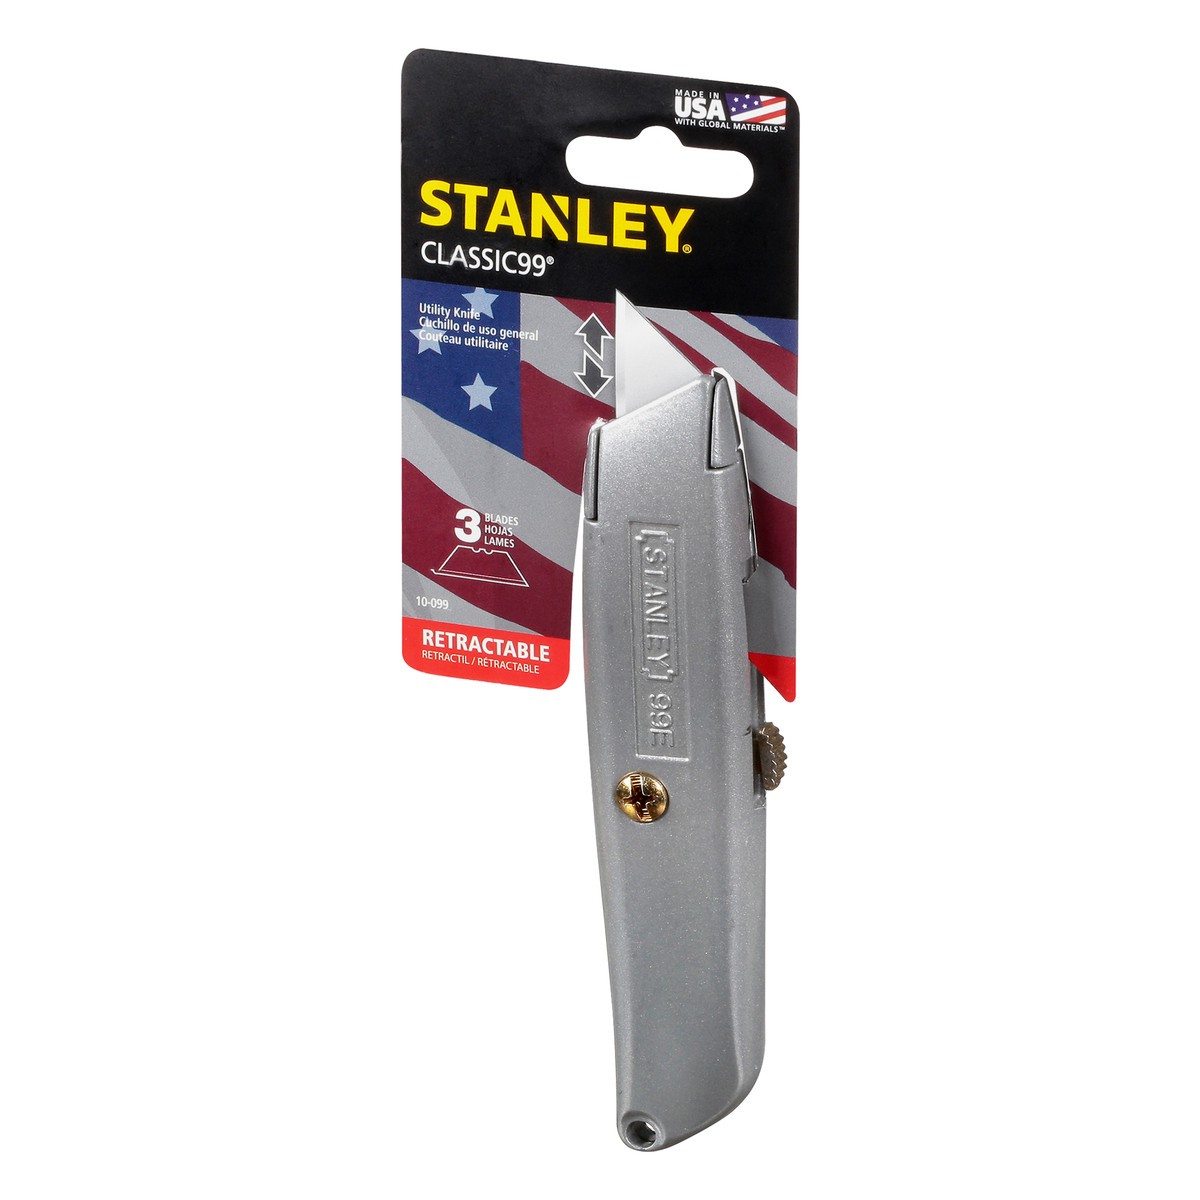 slide 7 of 11, STANLEY Classic99 Retractable Utility Knife 1 ea, 1 ct